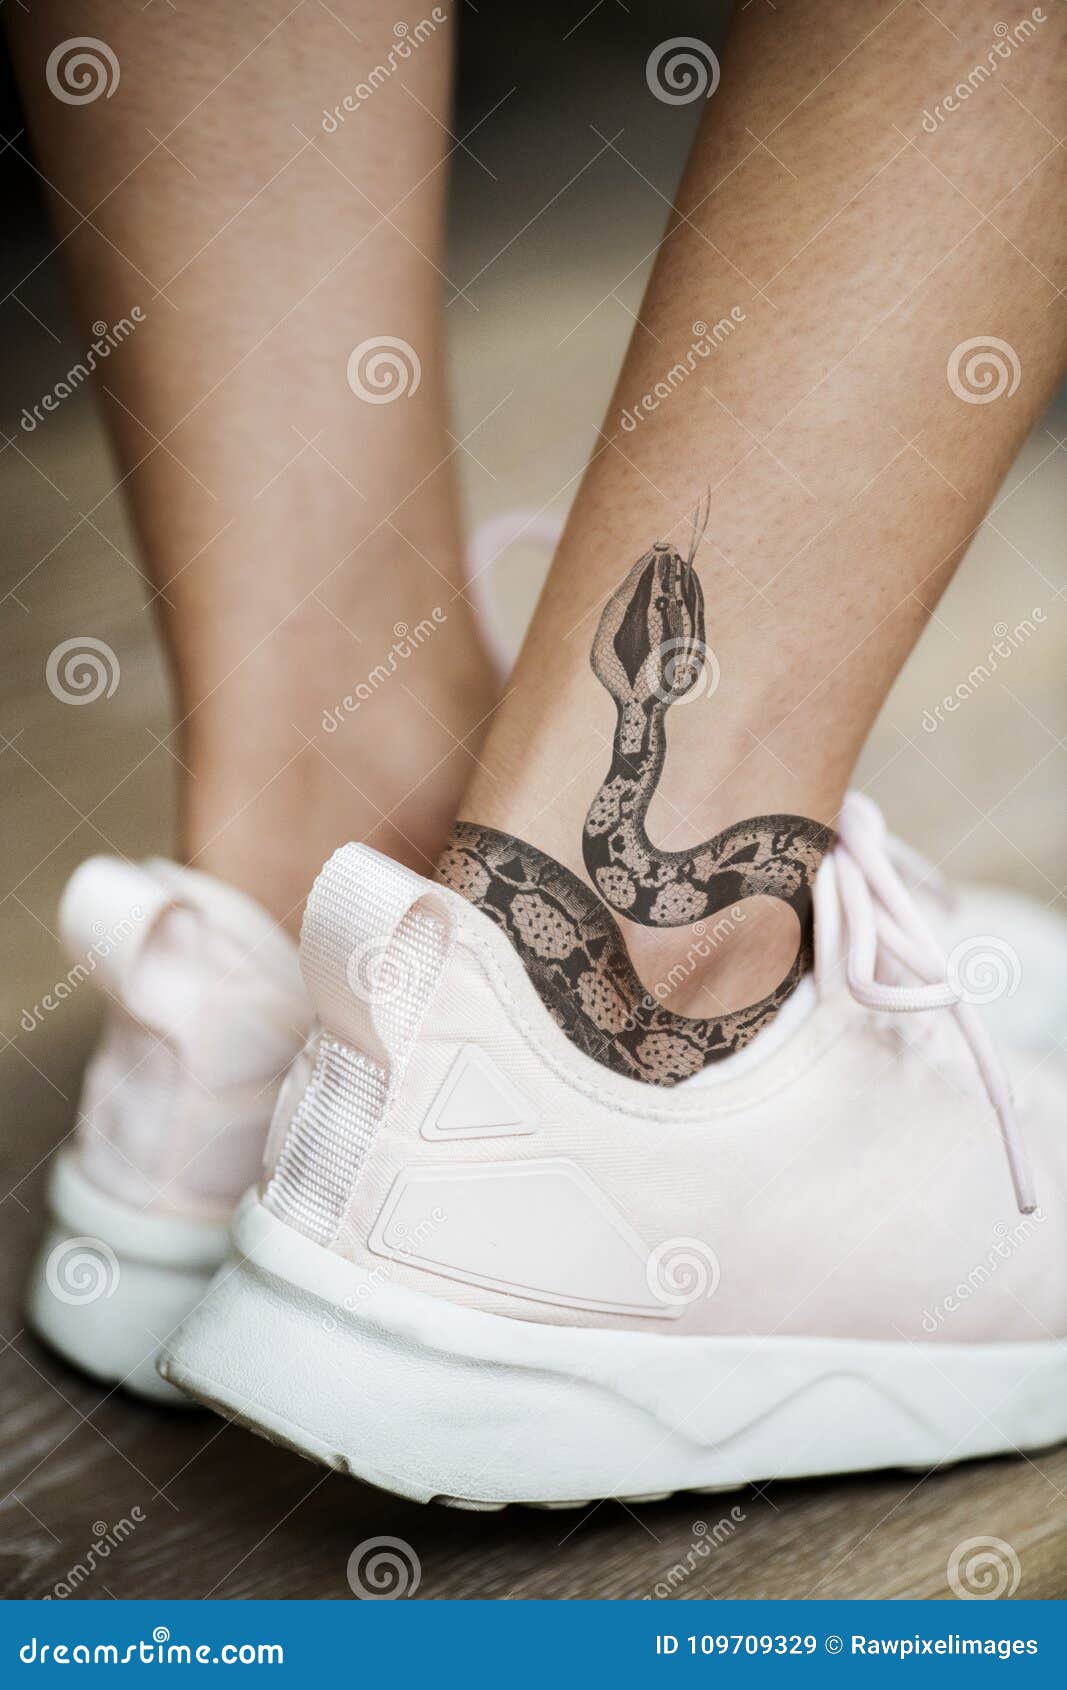 50 Elegant Ankle Tattoos for Women With Style - TattooBlend-cheohanoi.vn